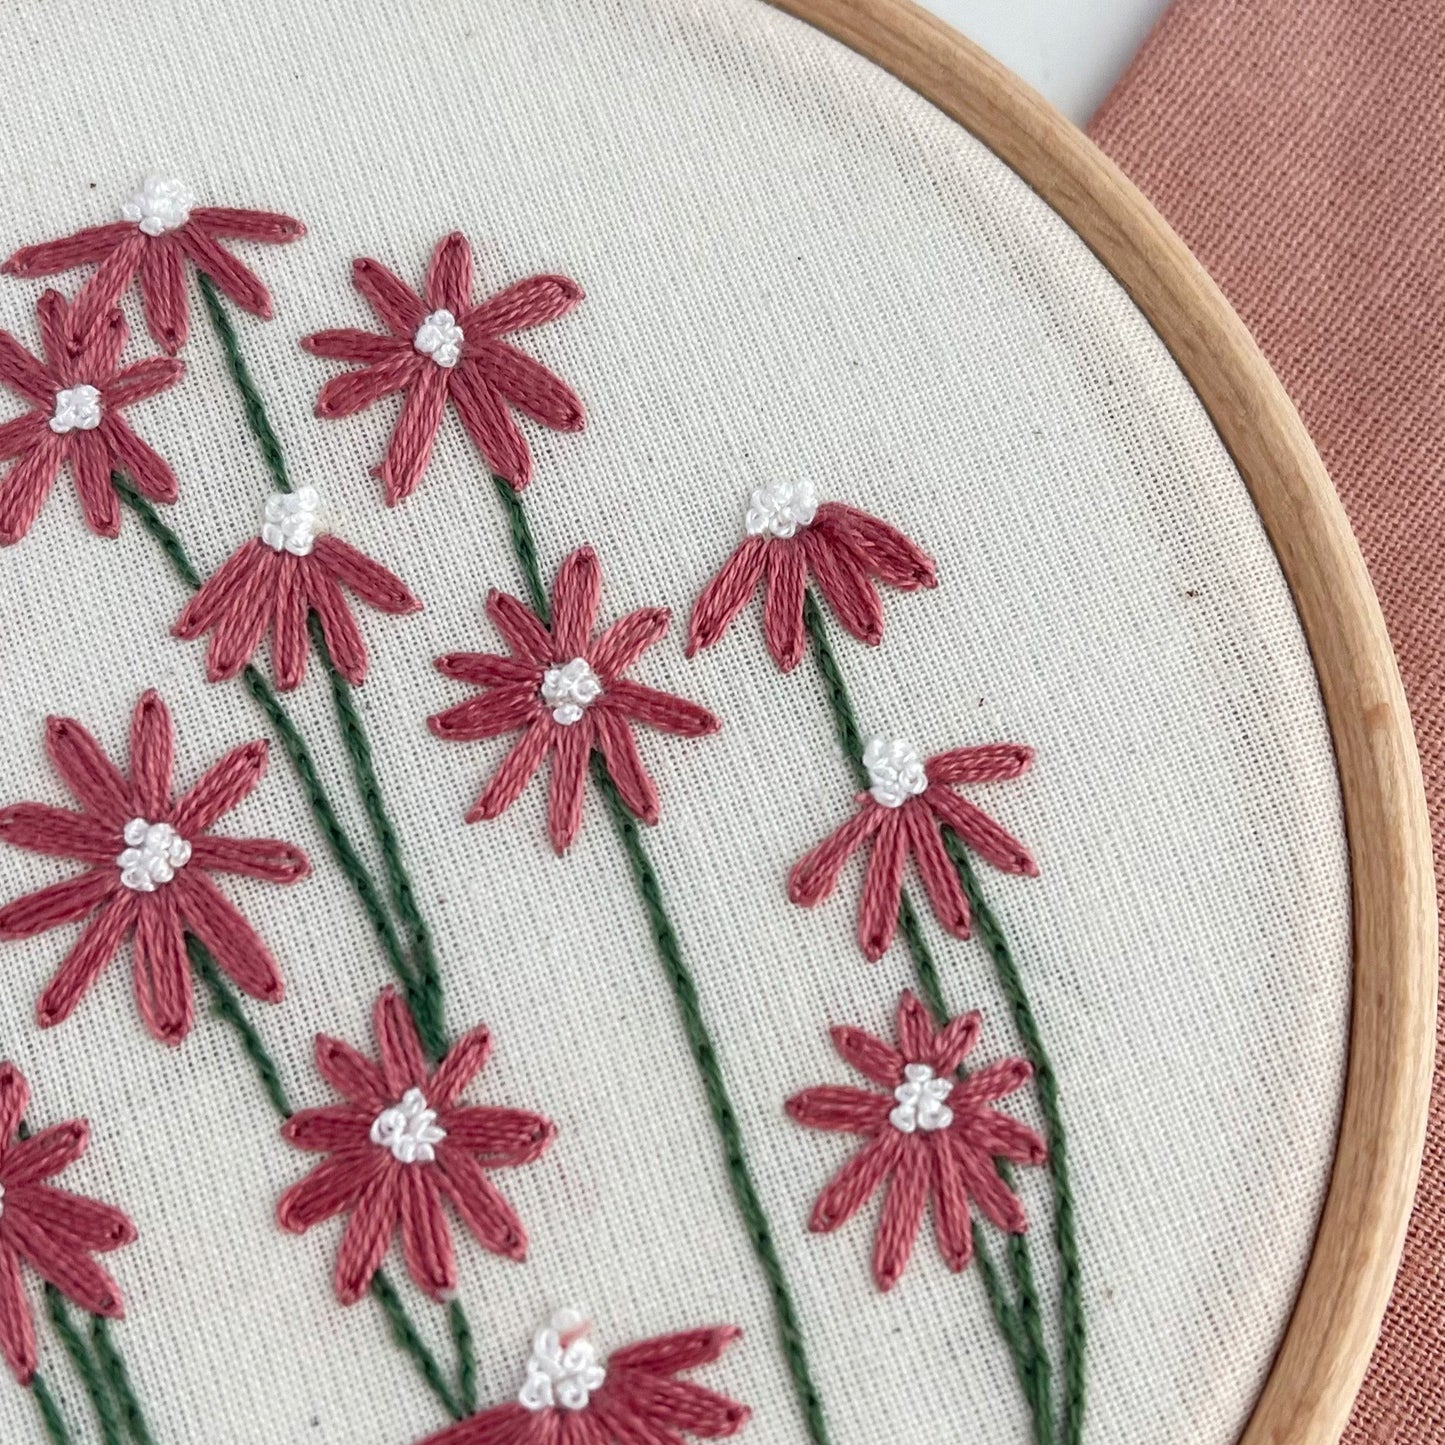 Bloom Floral Hand Embroidery PDF Pattern